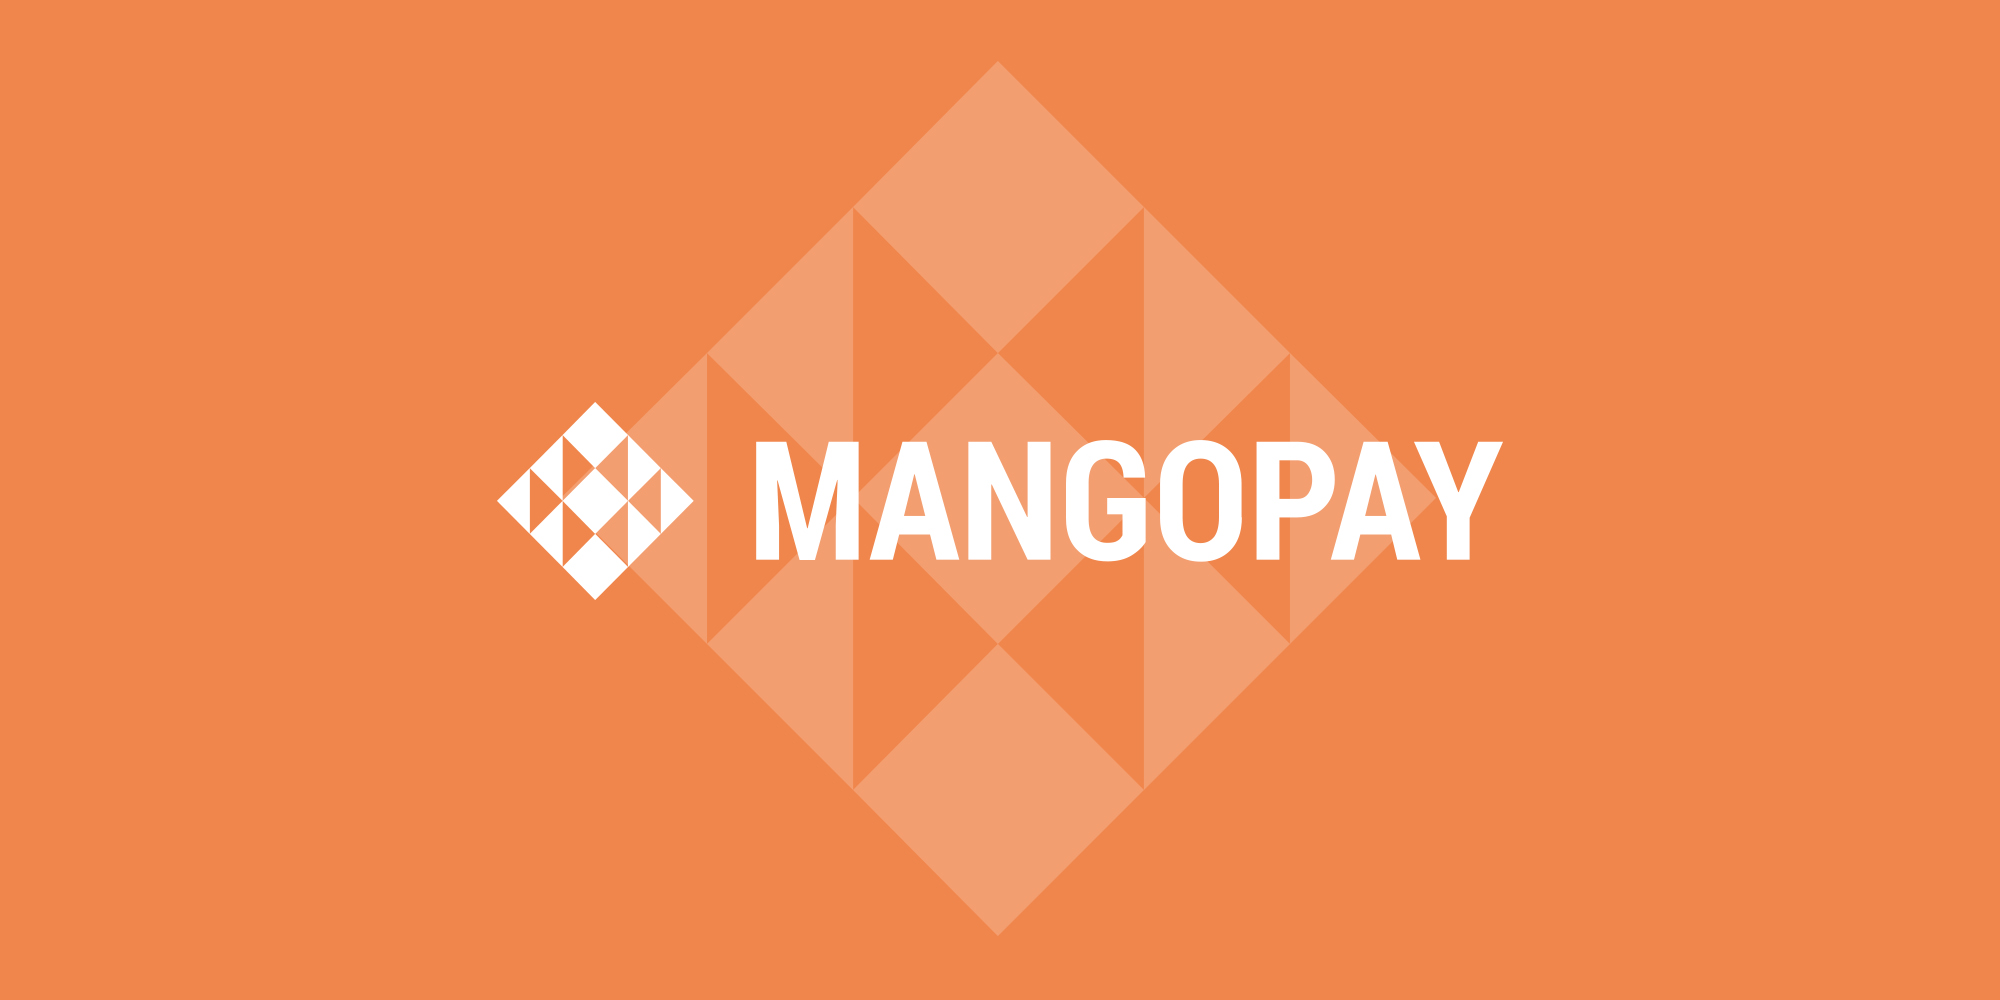 MANGOPAY and Nethone join forces to provide dedicated anti-fraud solutions